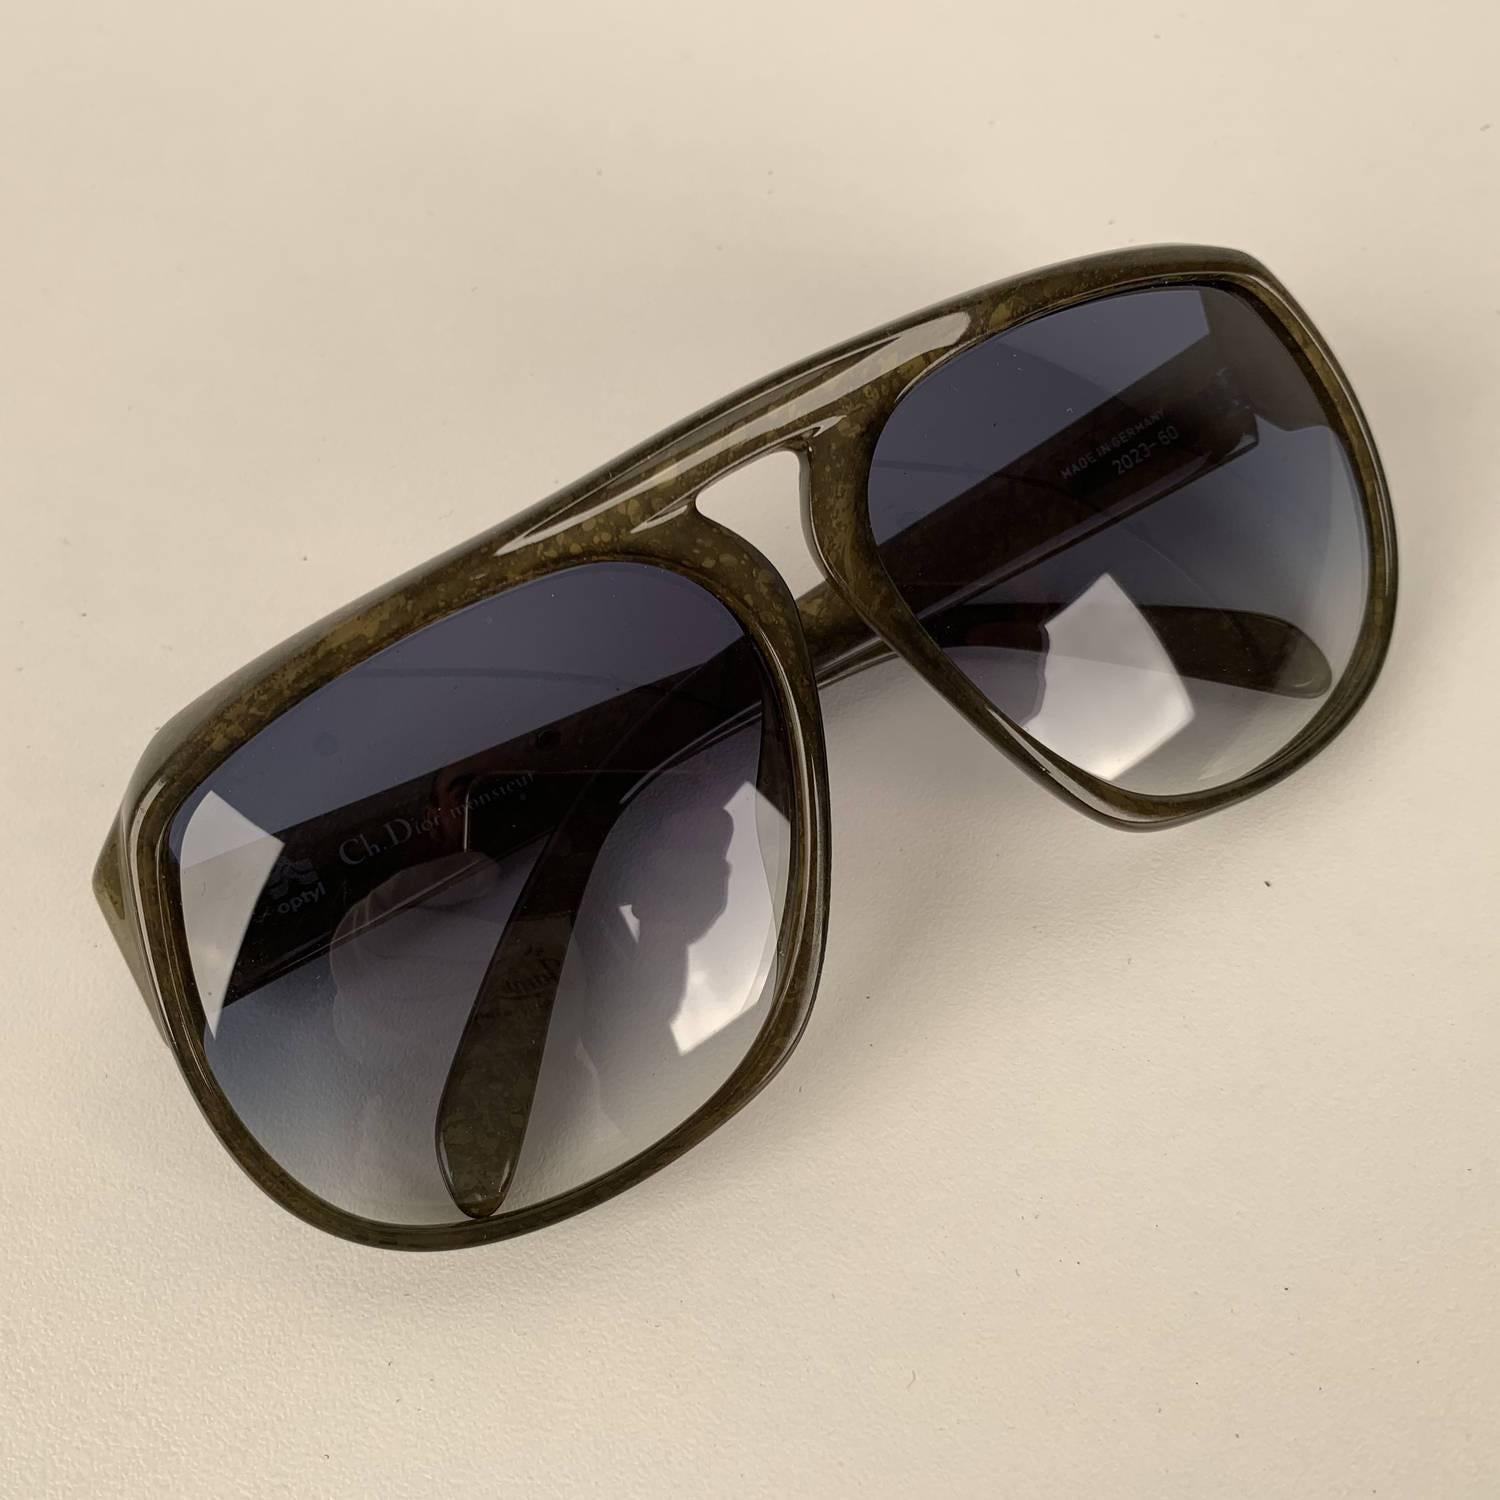 MATERIAL: Optyl COLOR: Green MODEL: Aviator GENDER: Adult Unisex SIZE: Large COUNTRY OF MANUFACTURE: Germany Condition CONDITION DETAILS: NEW - NOS (NEW OLD STOCK) - It will come with a Generic Case Measurements MEASUREMENTS: TEMPLE MAX. LENGTH: 140